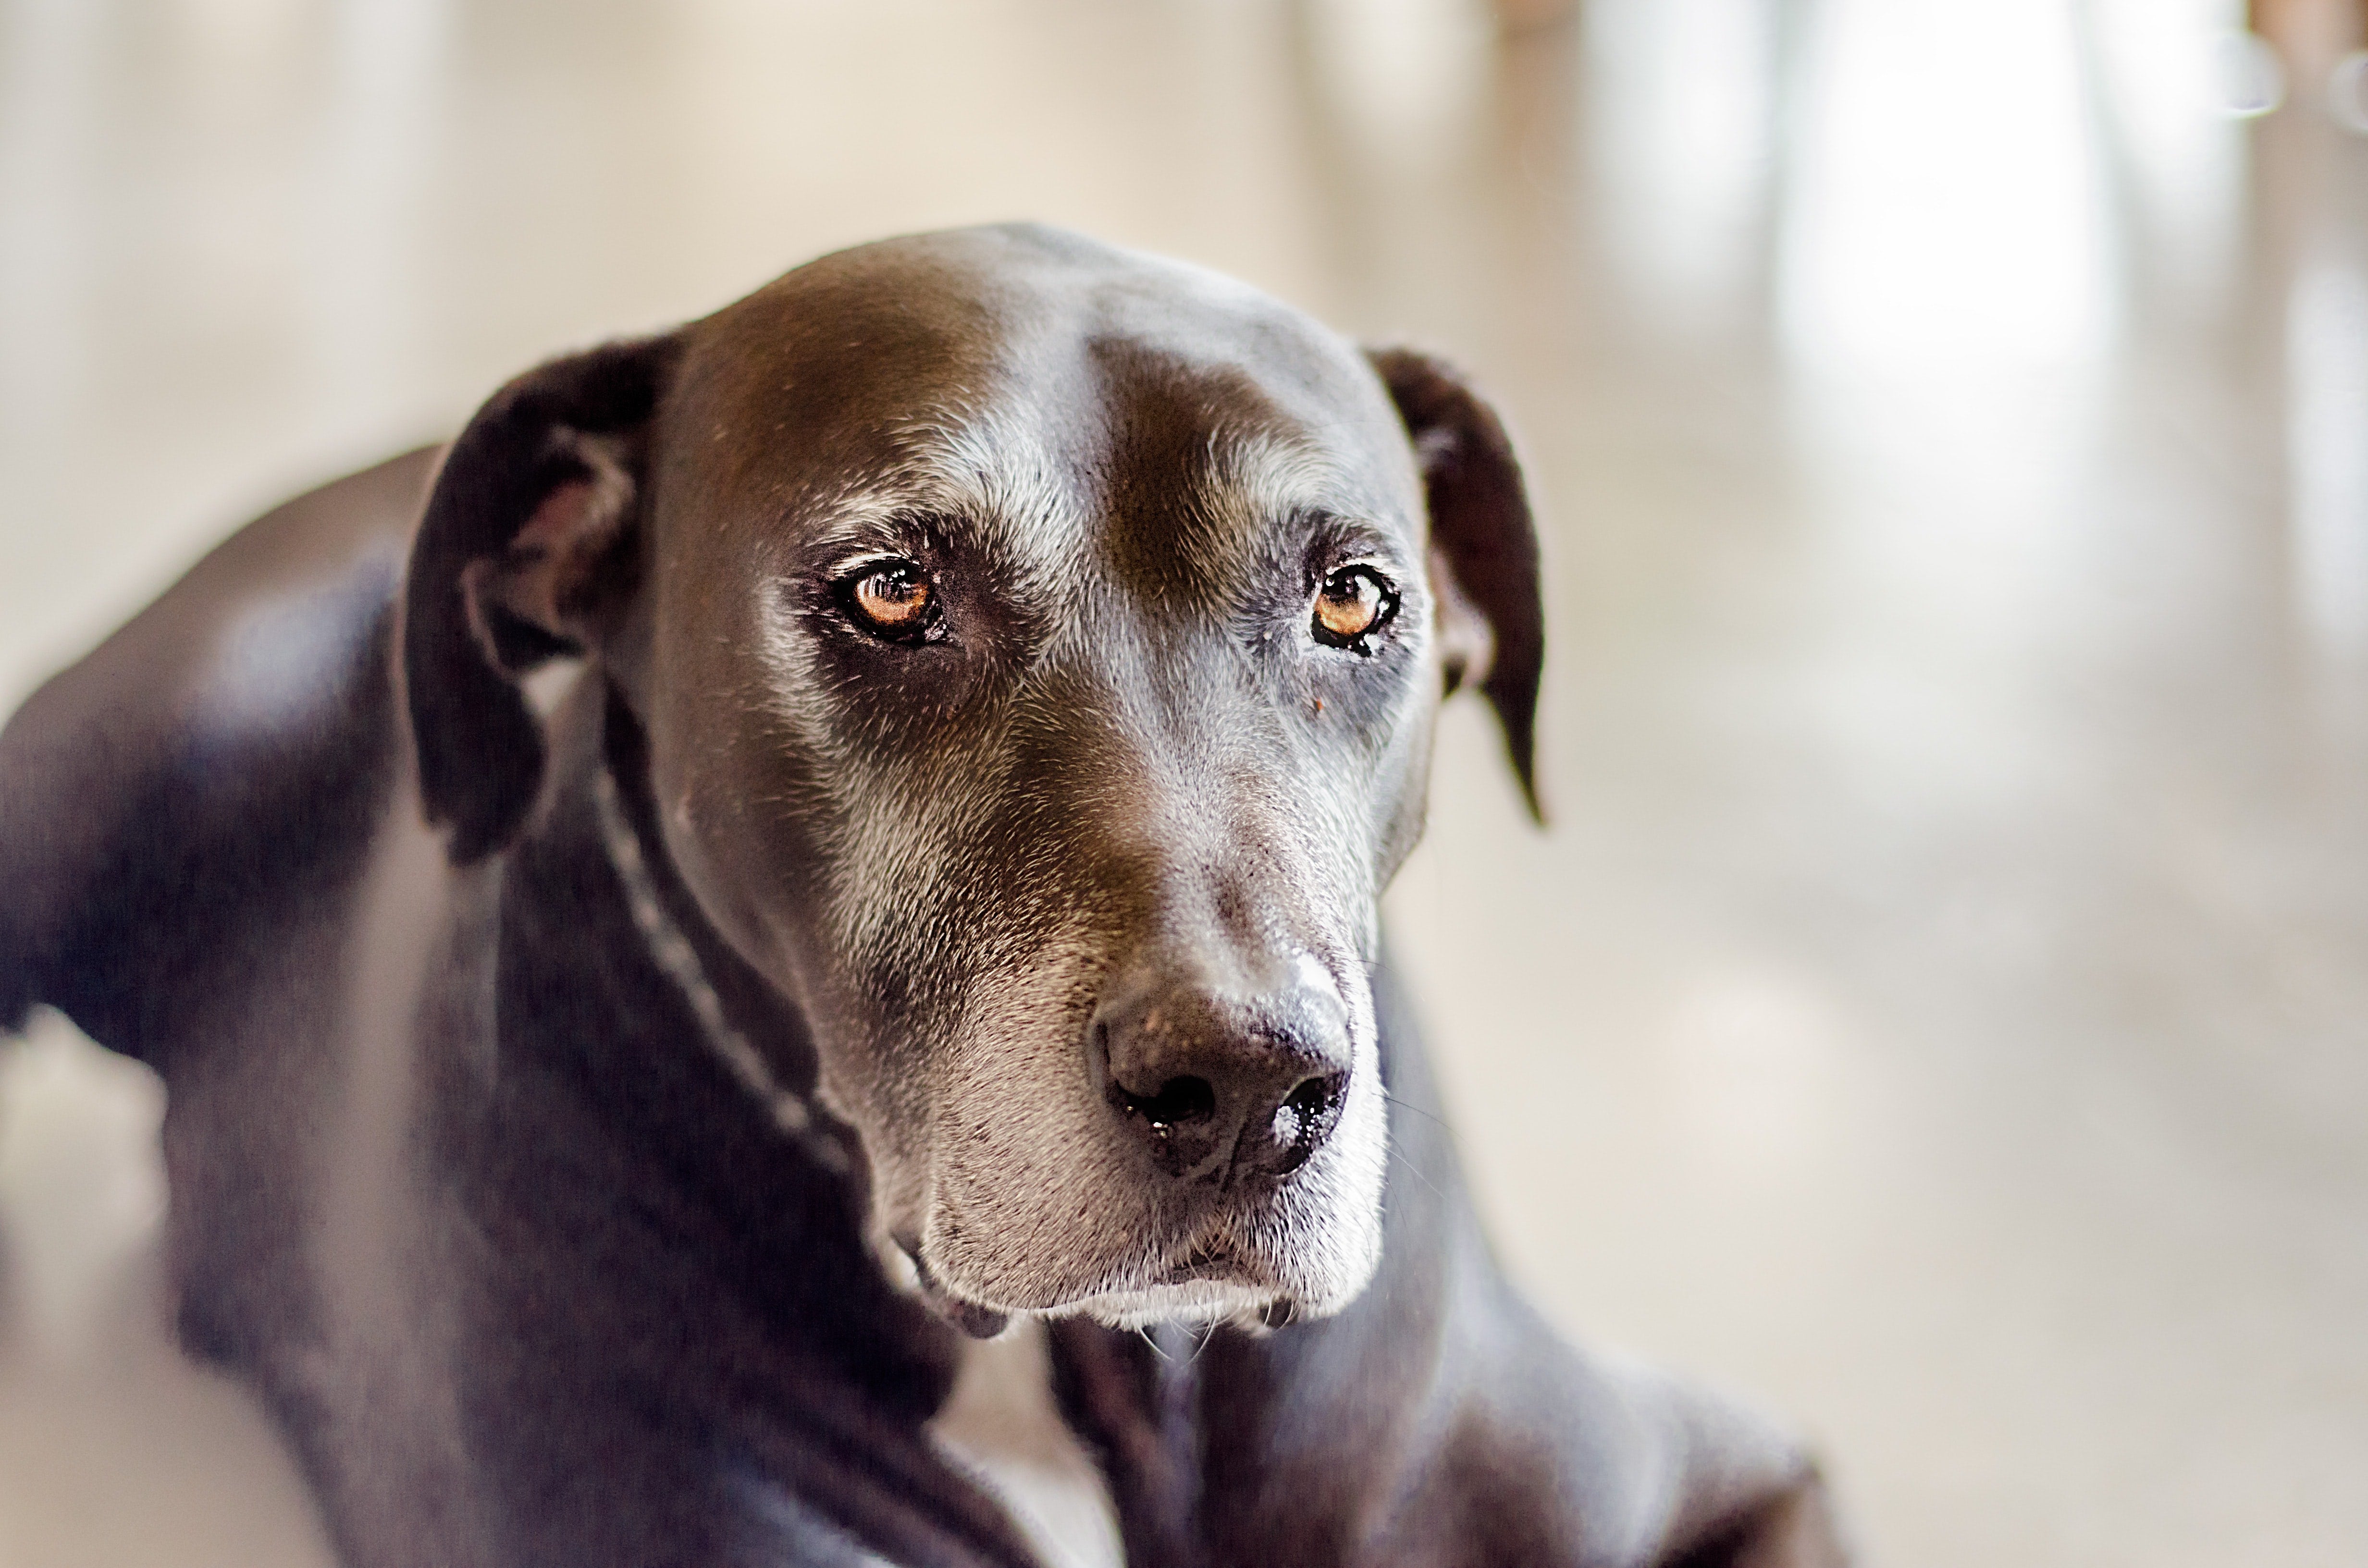 Vision loss in dogs: what causes it and how to manage it